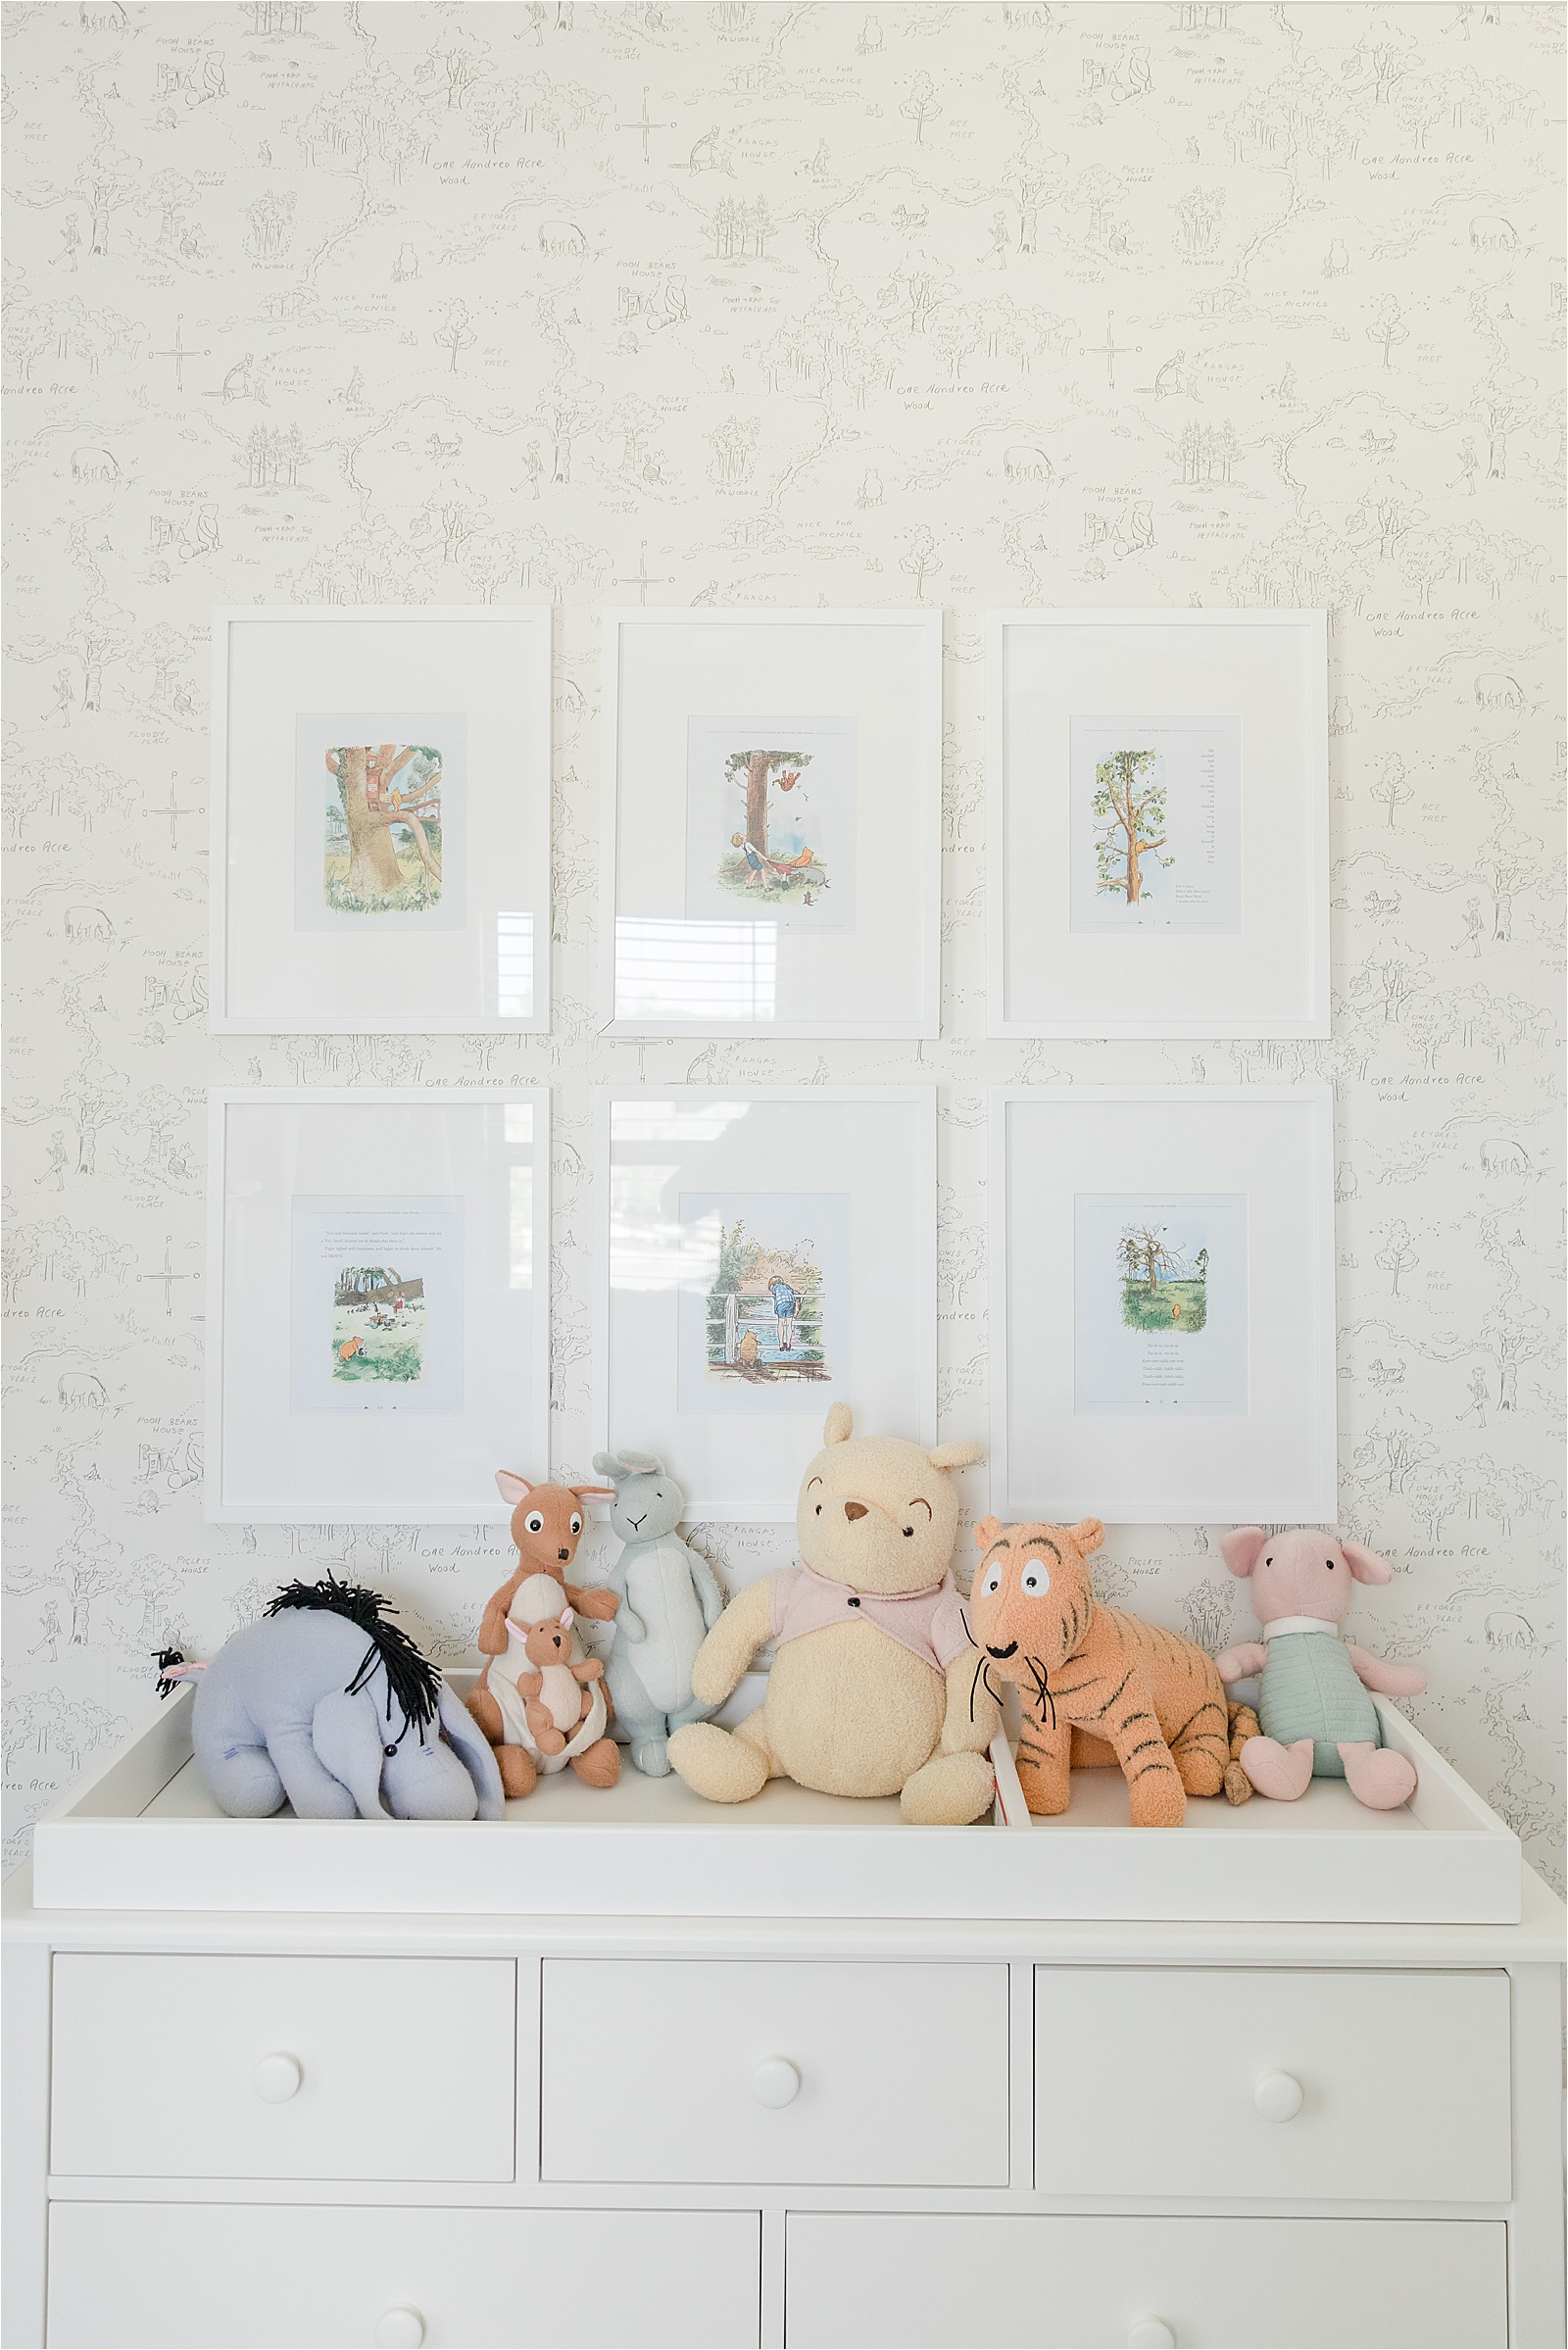 Framed pages from Winnie the Pooh book above changing table in nursery with vintage stuffed characters